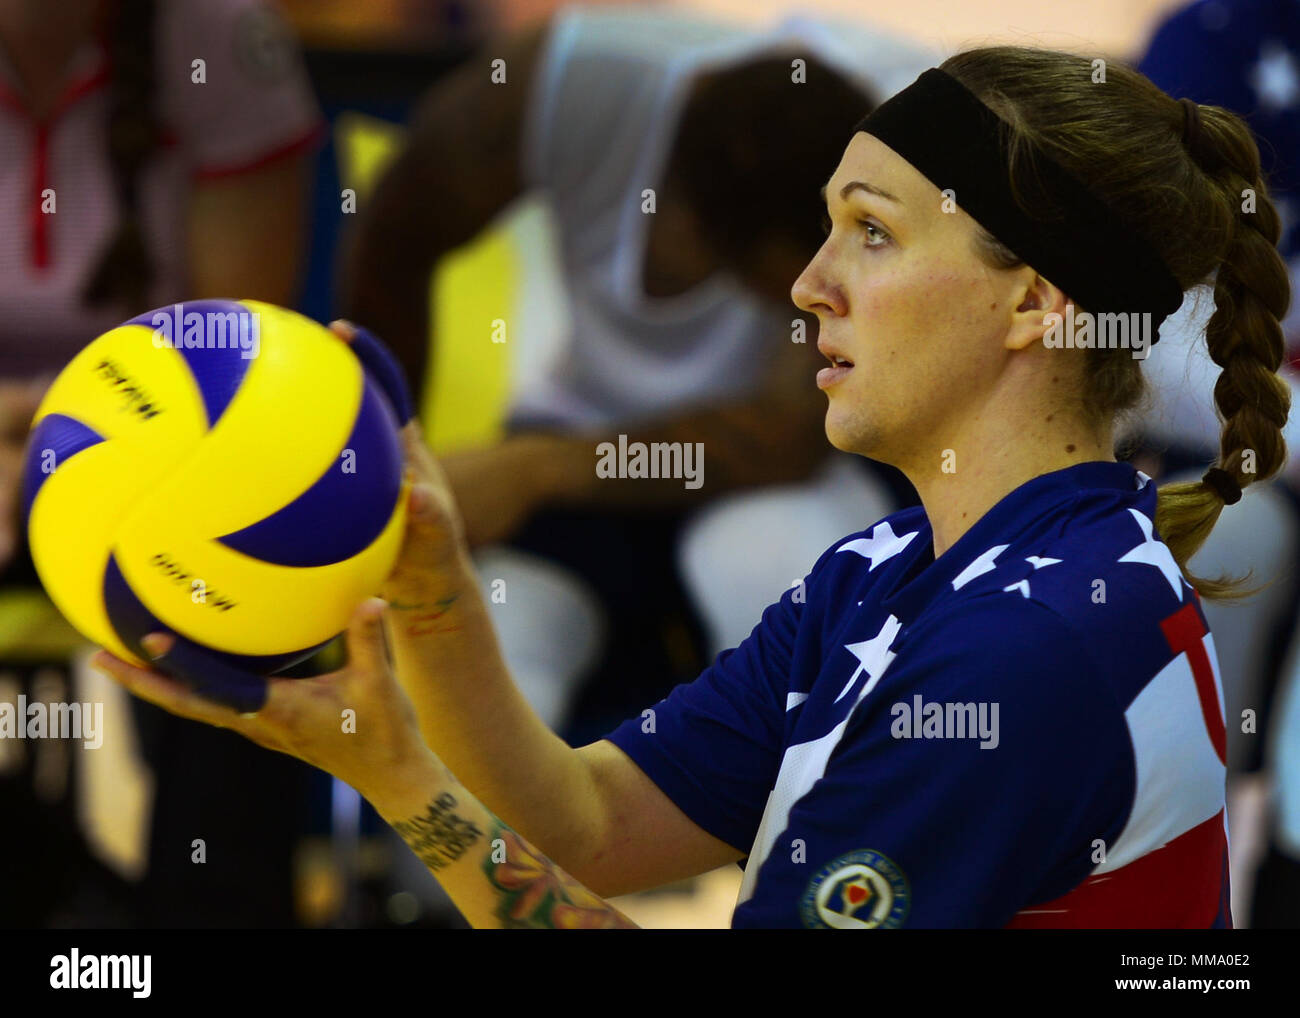 Page 4 - Volleyball Serve Not Beach High Resolution Stock Photography and  Images - Alamy